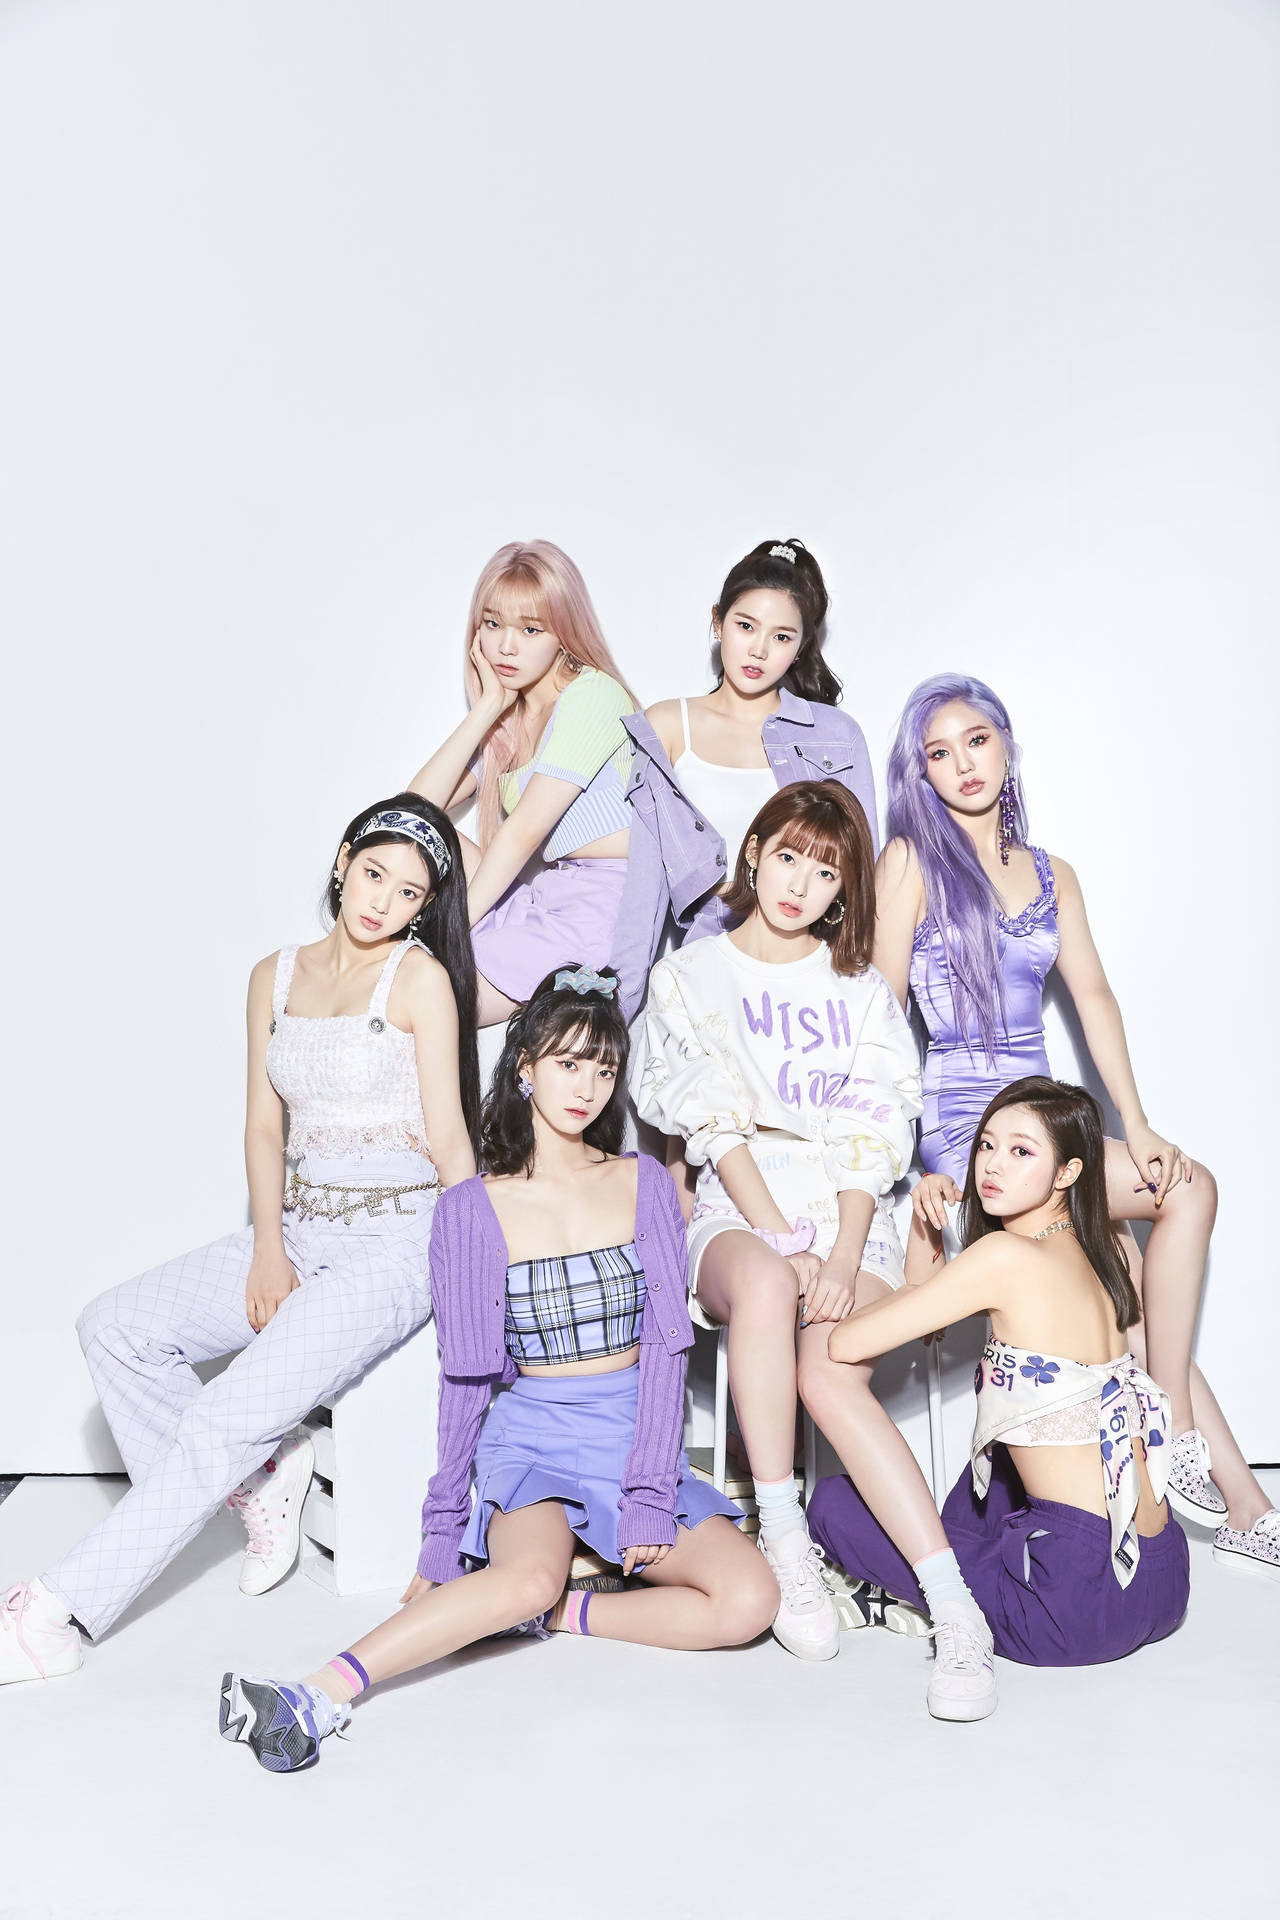 Oh My Girl Pastel Purple Outfits Wallpaper